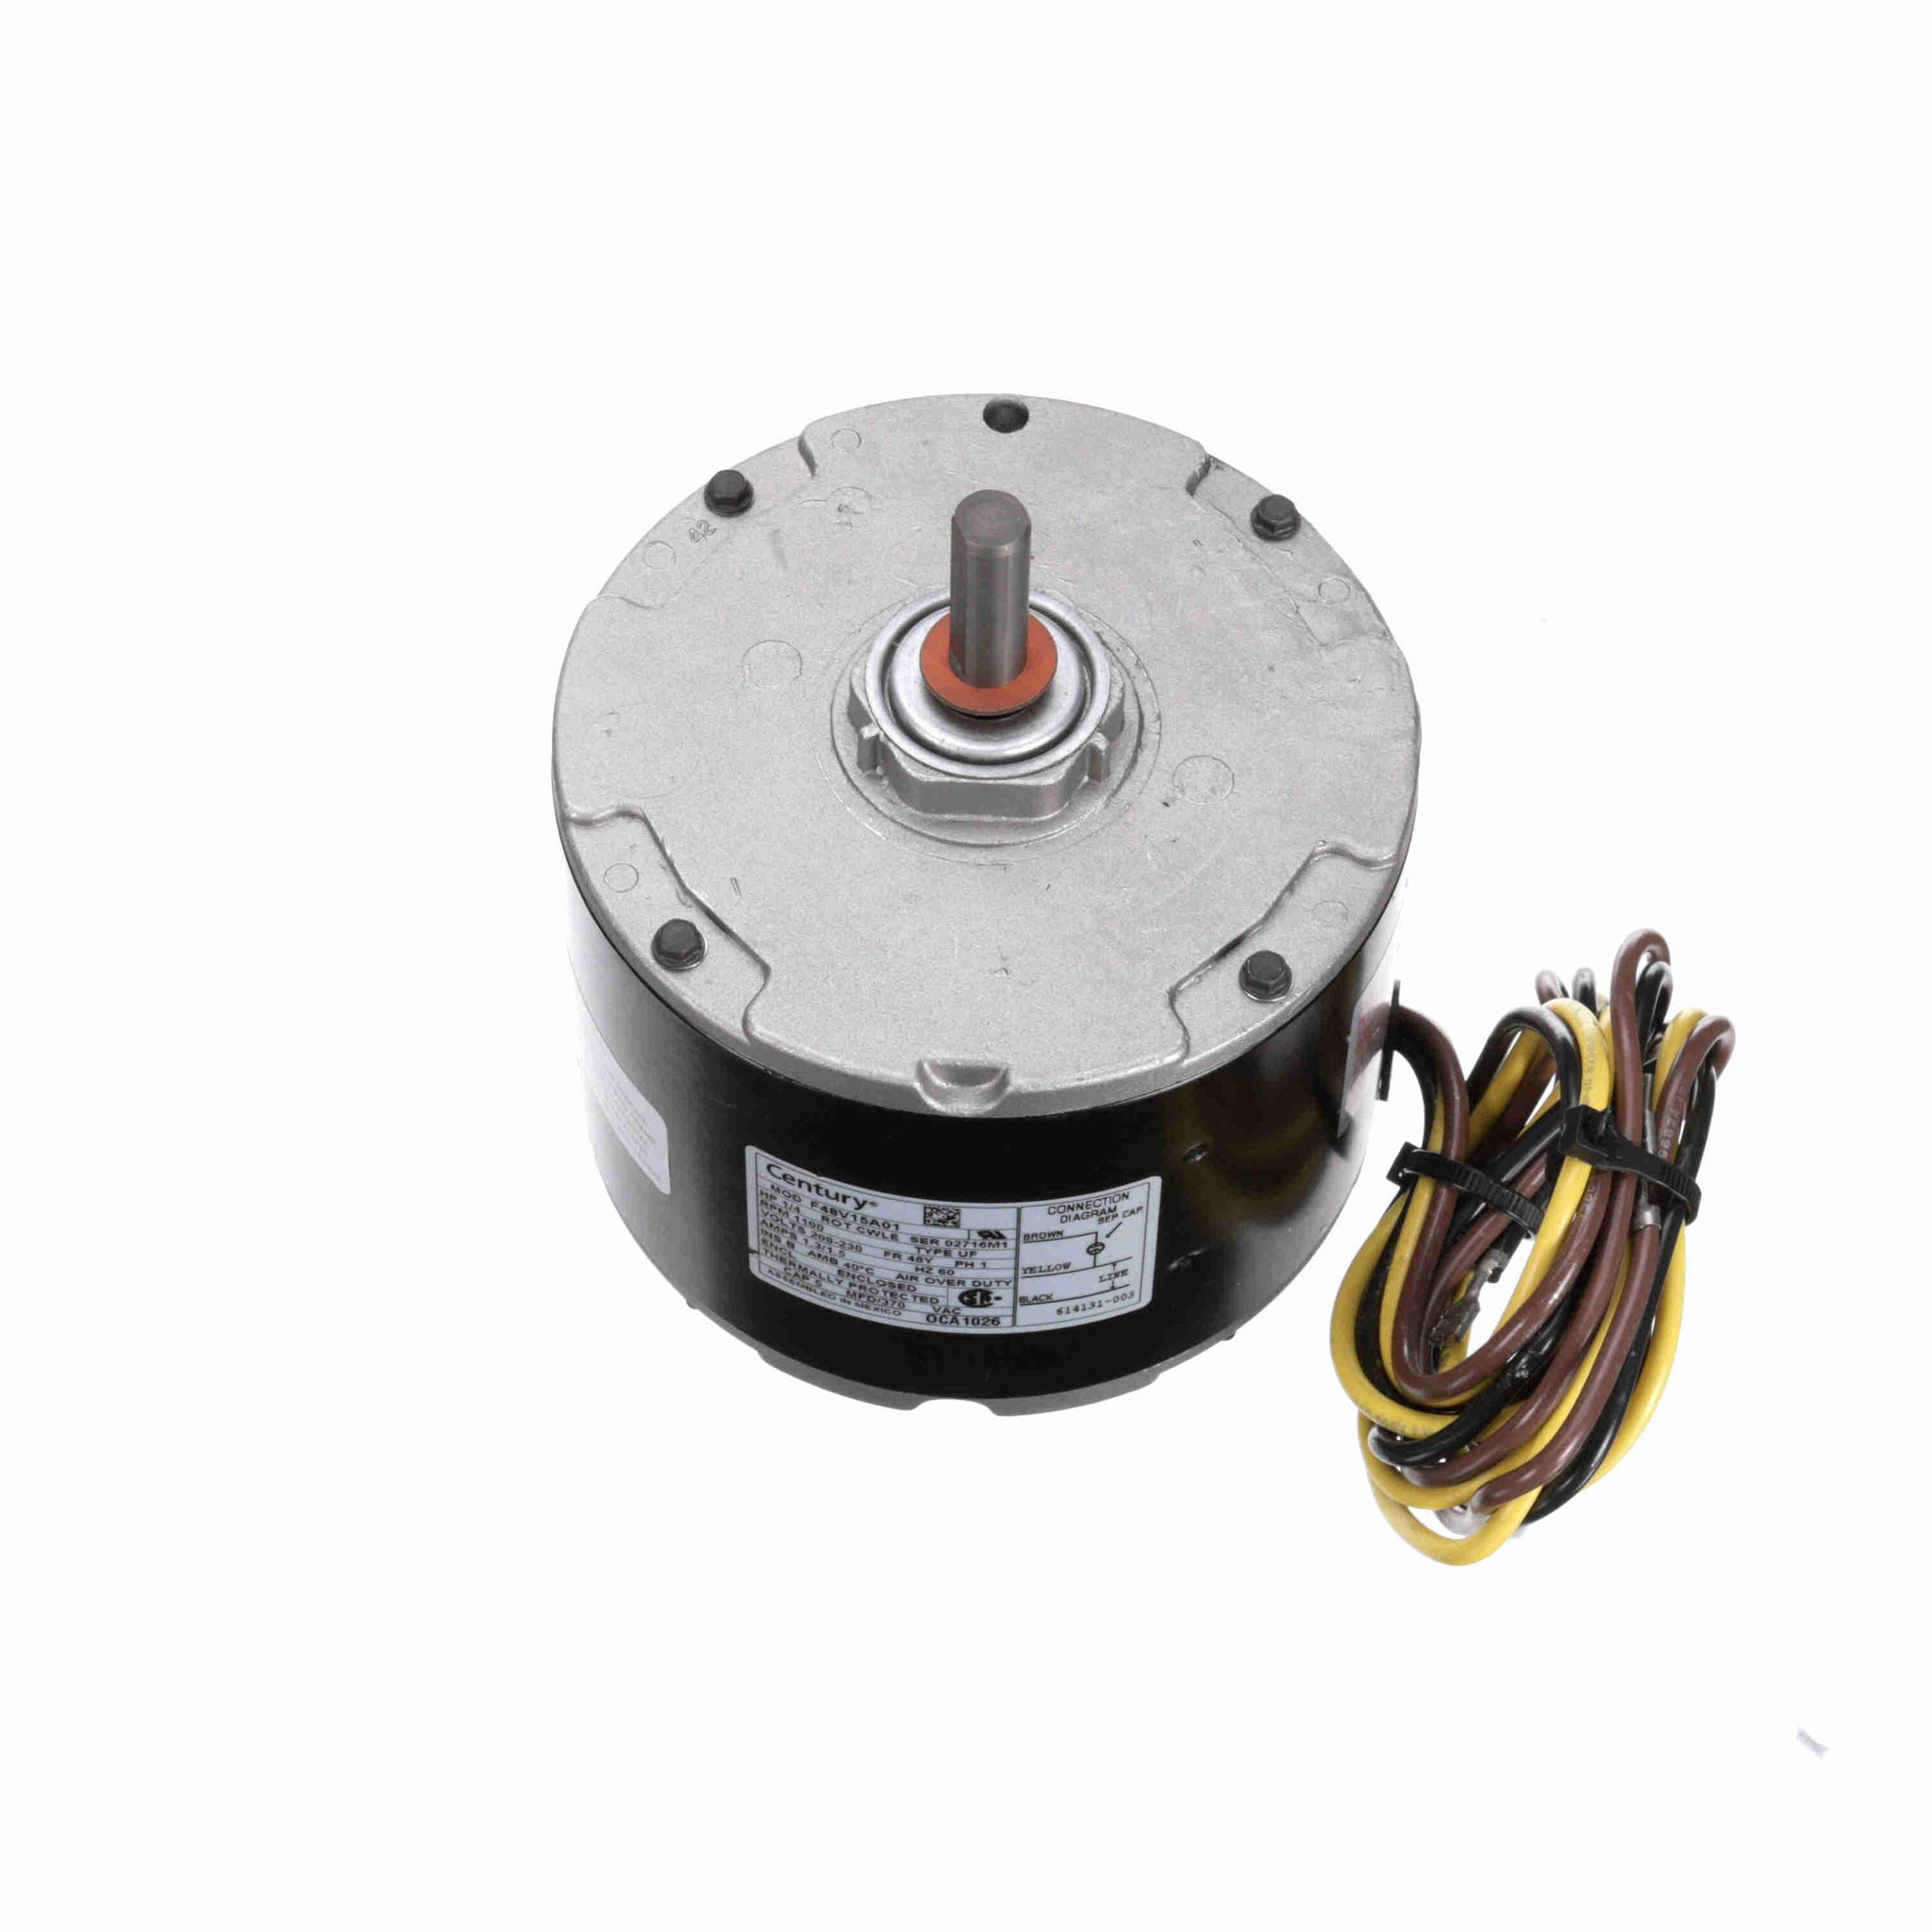 OCA1026 - 1/4 HP OEM Replacement Motor, 1100 RPM, 208-230 Volts, 48 Frame, TEAO - Hardware & Moreee